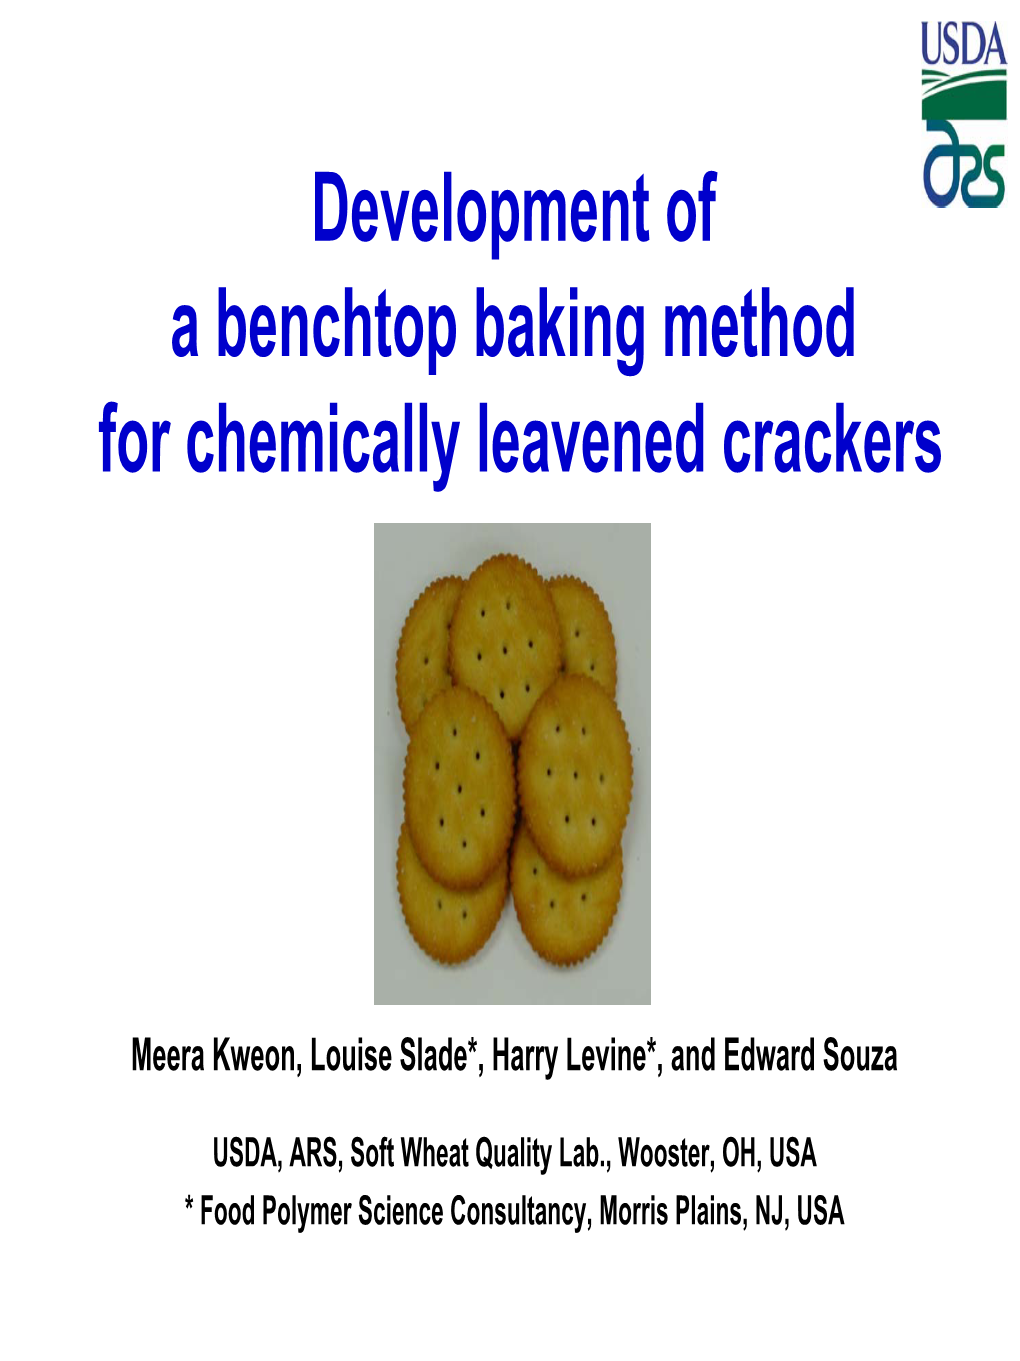 Development of a Benchtop Baking Method for Chemically Leavened Crackers